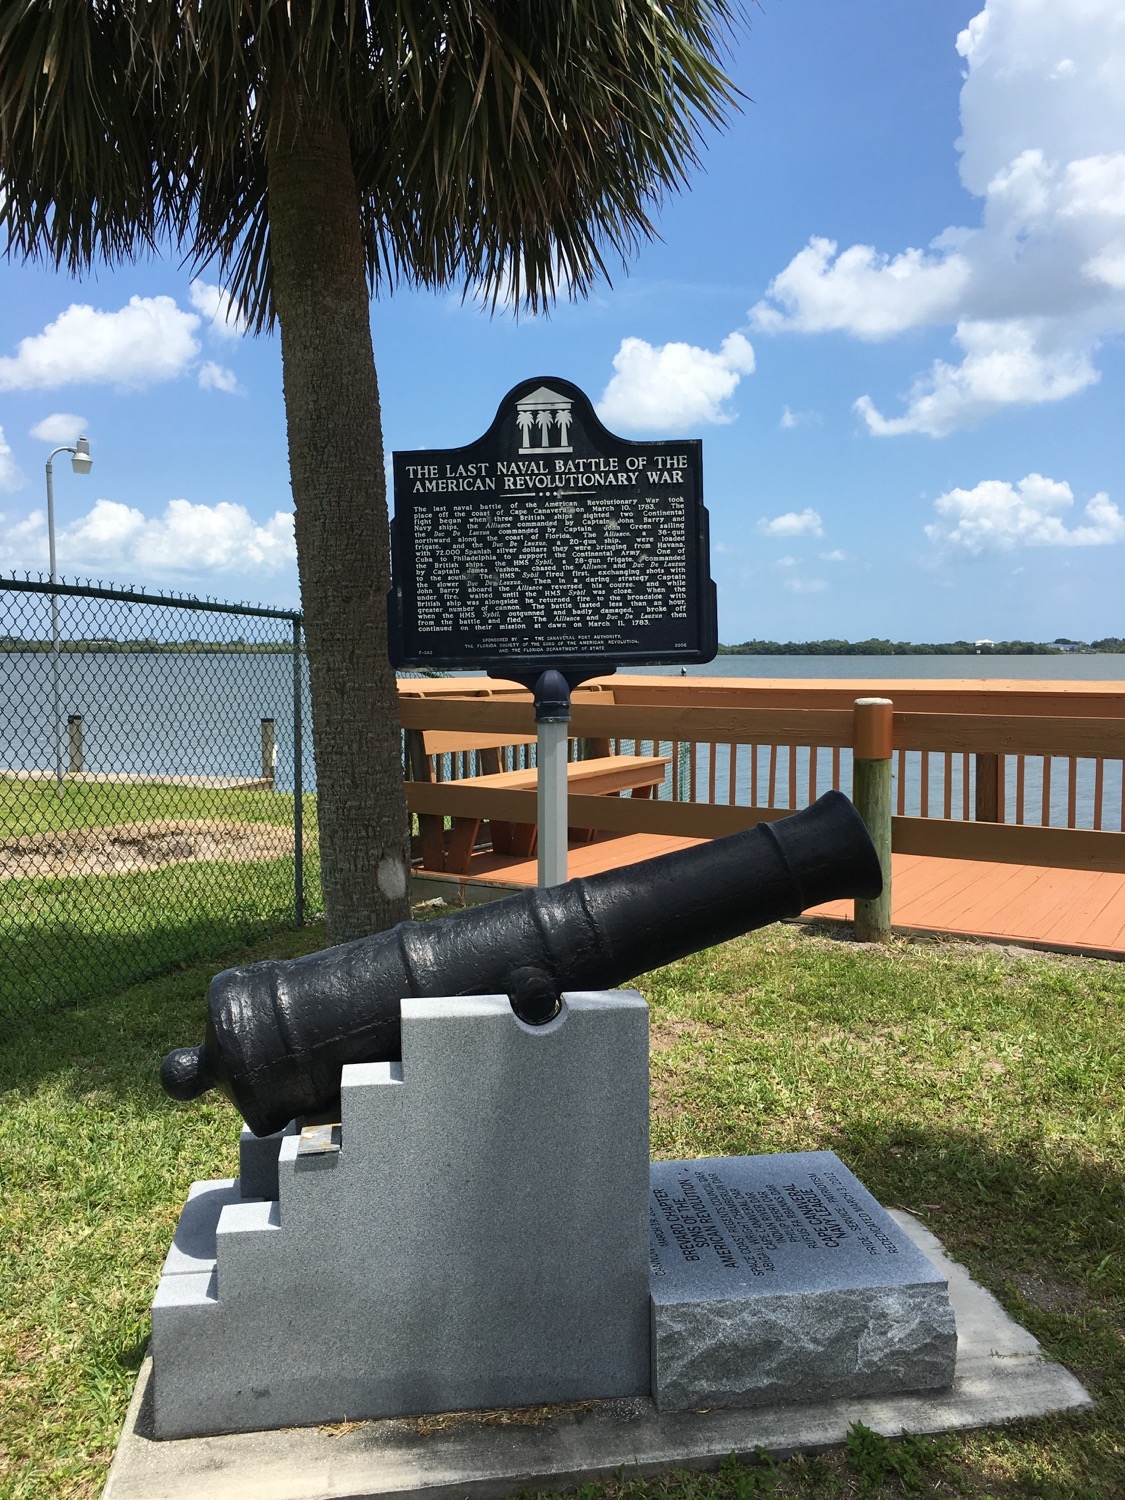 The Last Naval Battle Marker and Cannon Monument